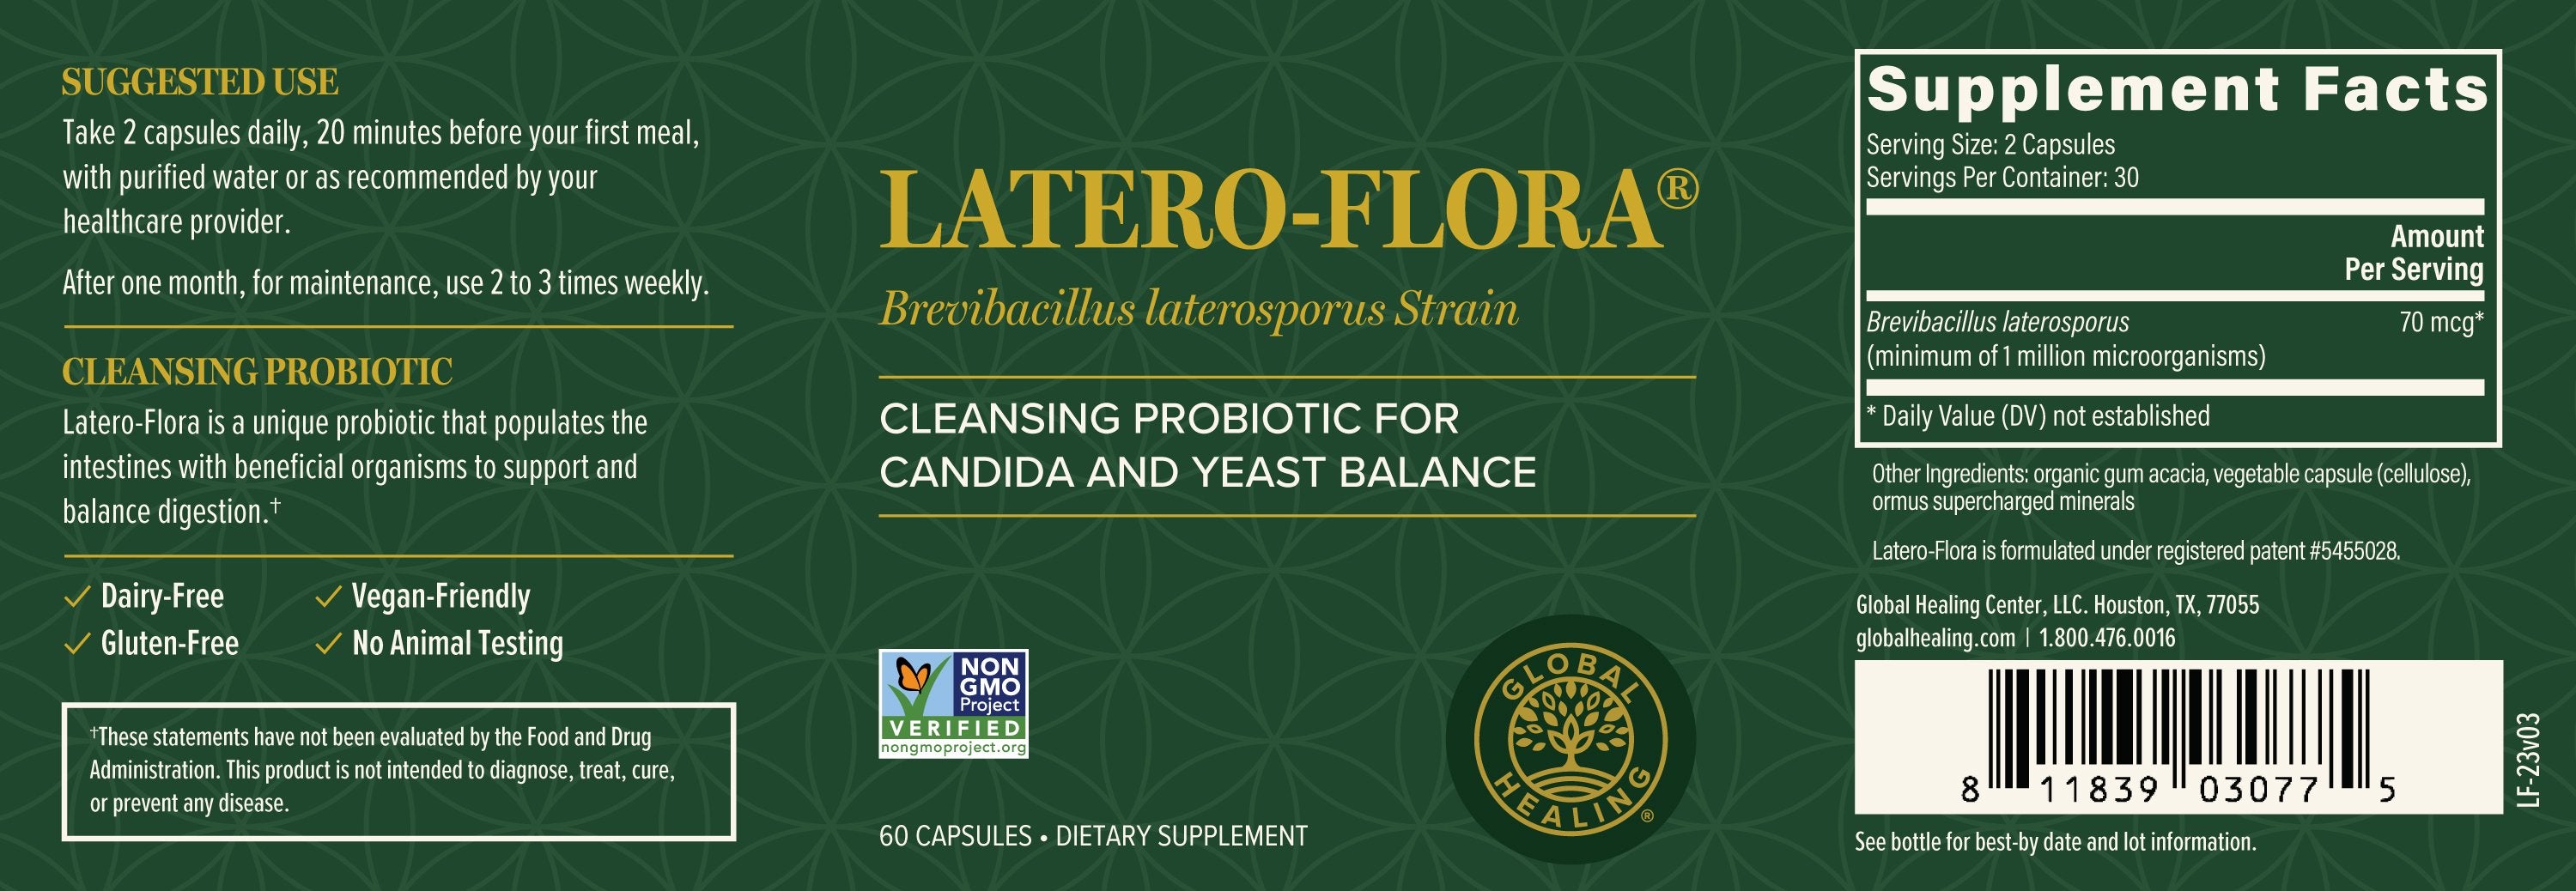 The label for Latero-Flora, a Probiotic Supplement for Healthy Digestion.